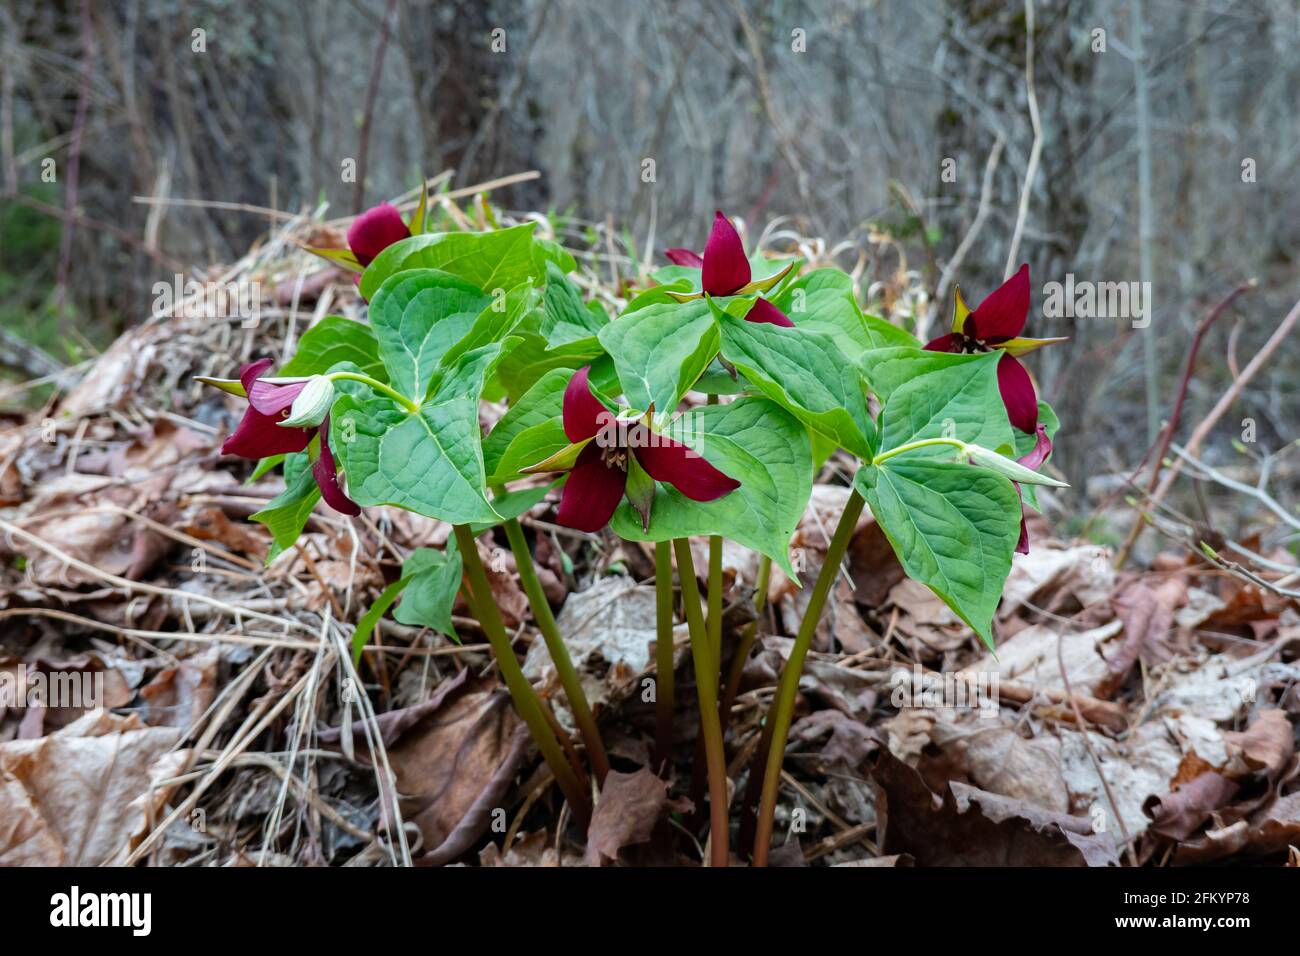 A colony of red trillium plants with flowers, Trillium erectum, growing in the wild Adirondack Mountains, NY USA forest in early spring. Stock Photo